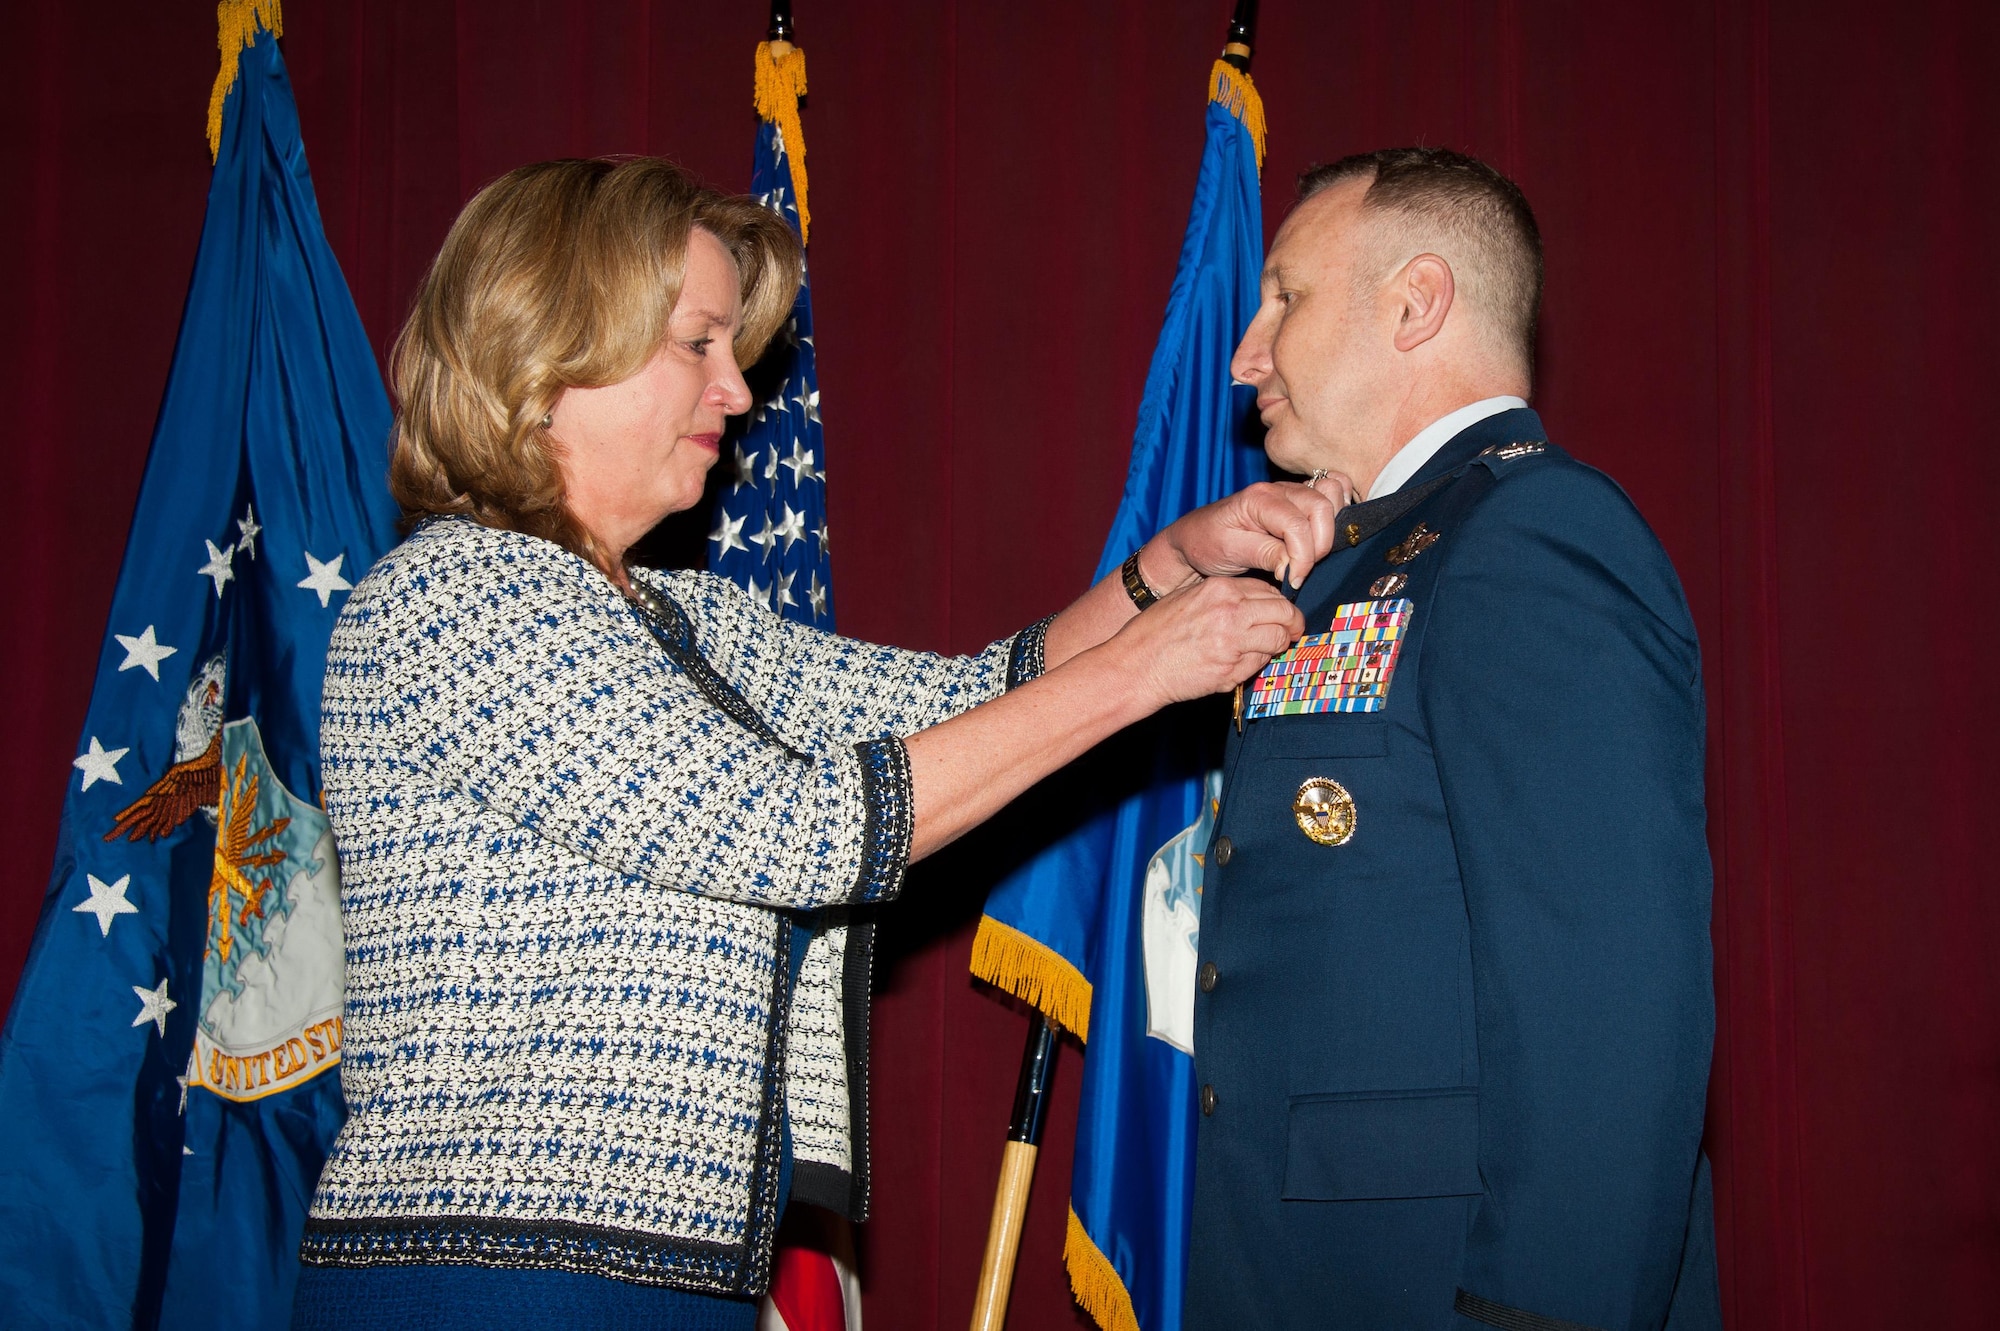 The Honorable Deborah Lee James, 23rd Secretary of the Air Force, arrives at Maxwell to present Air War College faculty member Colonel Christopher C. Barnett the Silver Star and the Silver Star first oak leaf cluster, Jan. 19, 2017. Secretary James chose her last day to honor Barnett for his gallantry in connection with 2009 military operations against an armed enemy of the United States, as well as to announce upgraded medals awarded to seven additional Airmen. (US Air Force photo by Melanie Rodgers Cox)